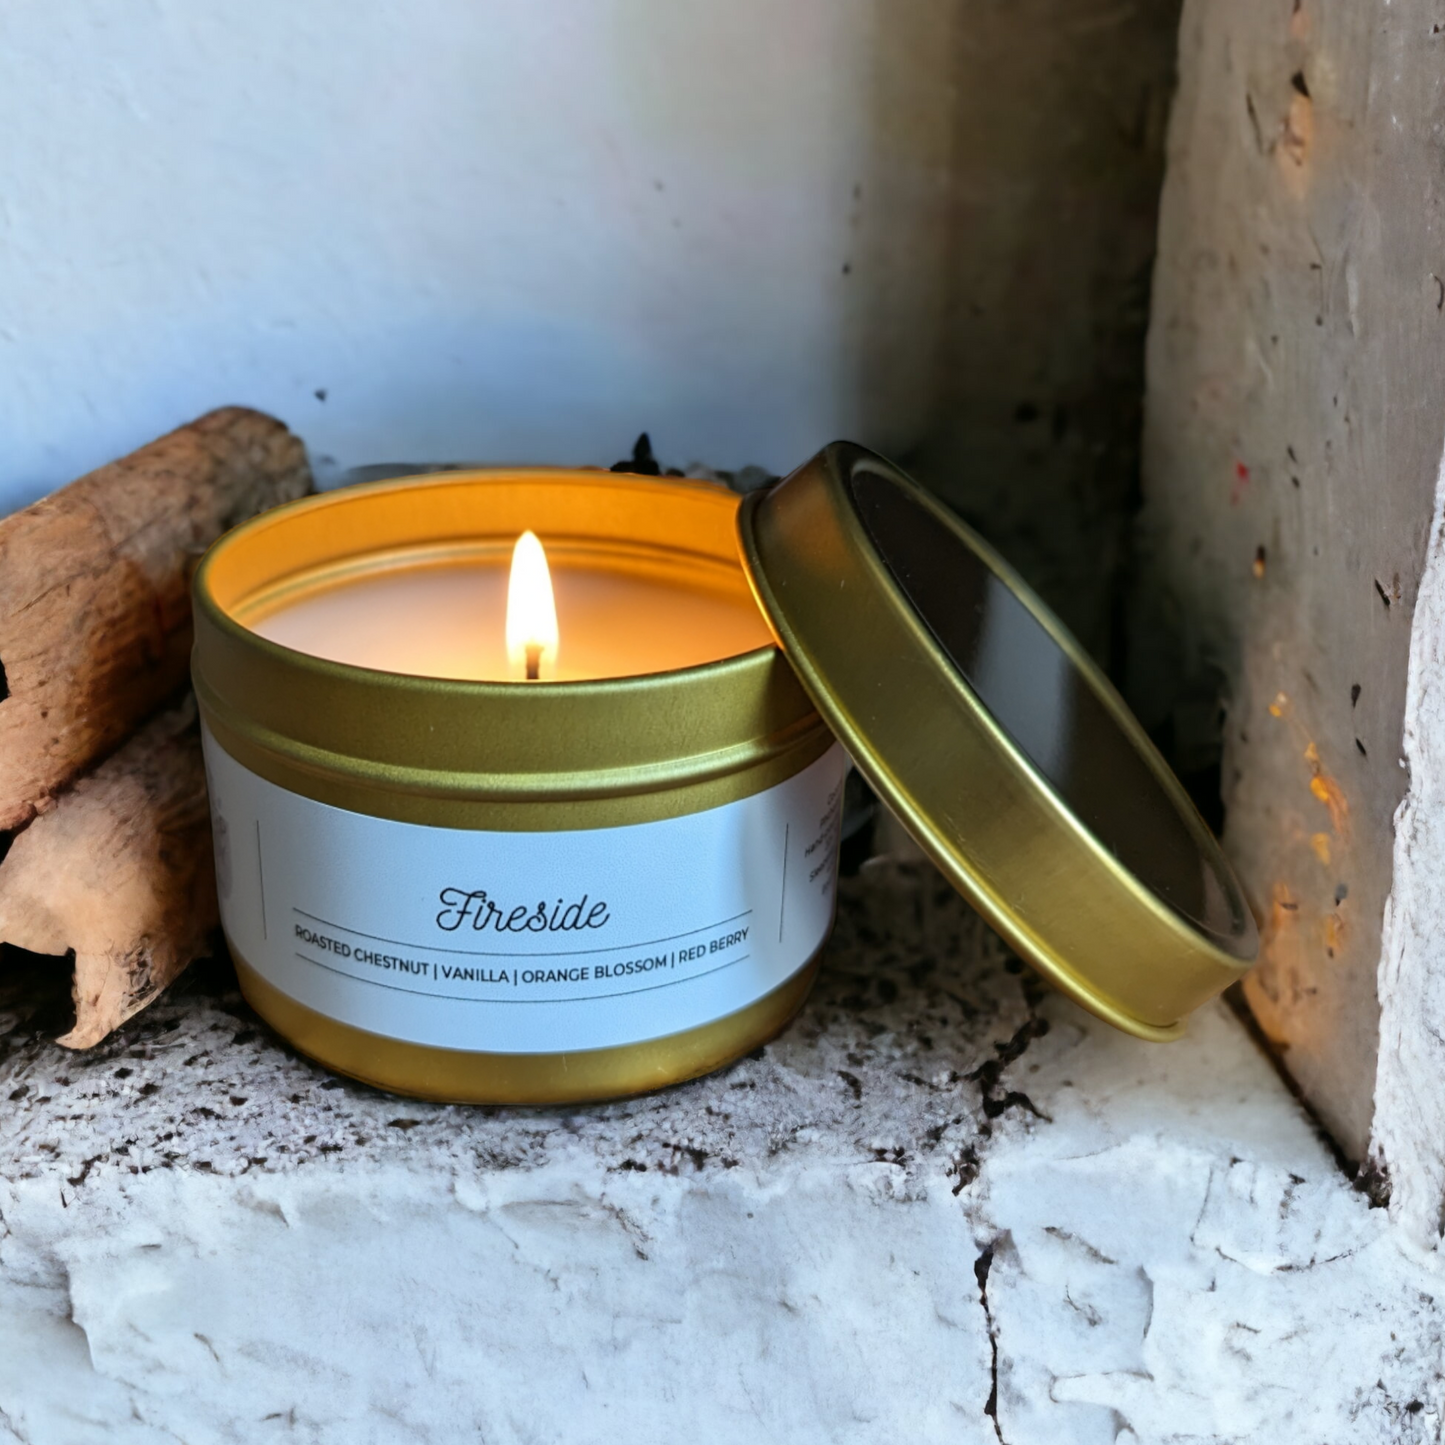 Fireside - Coconut Soy Candle - To Be Discontinued